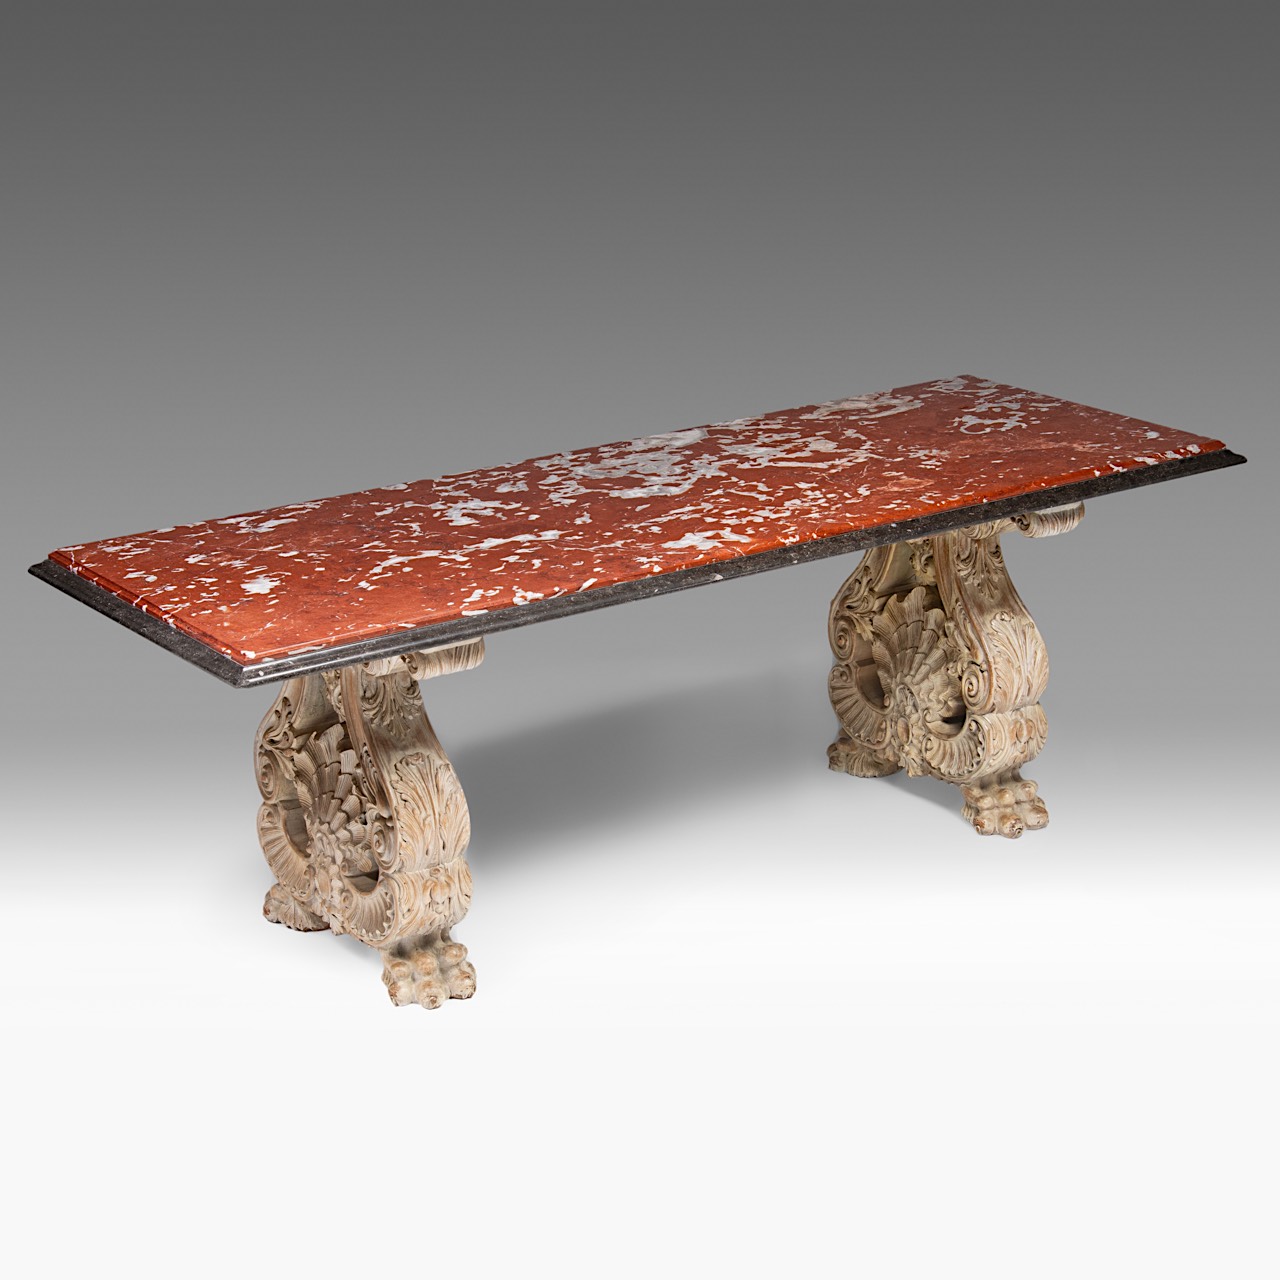 A Renaissance-style marble-topped table with sculpted wood trestles, H 76 cm - W 219 cm - D 84 cm - Image 4 of 6